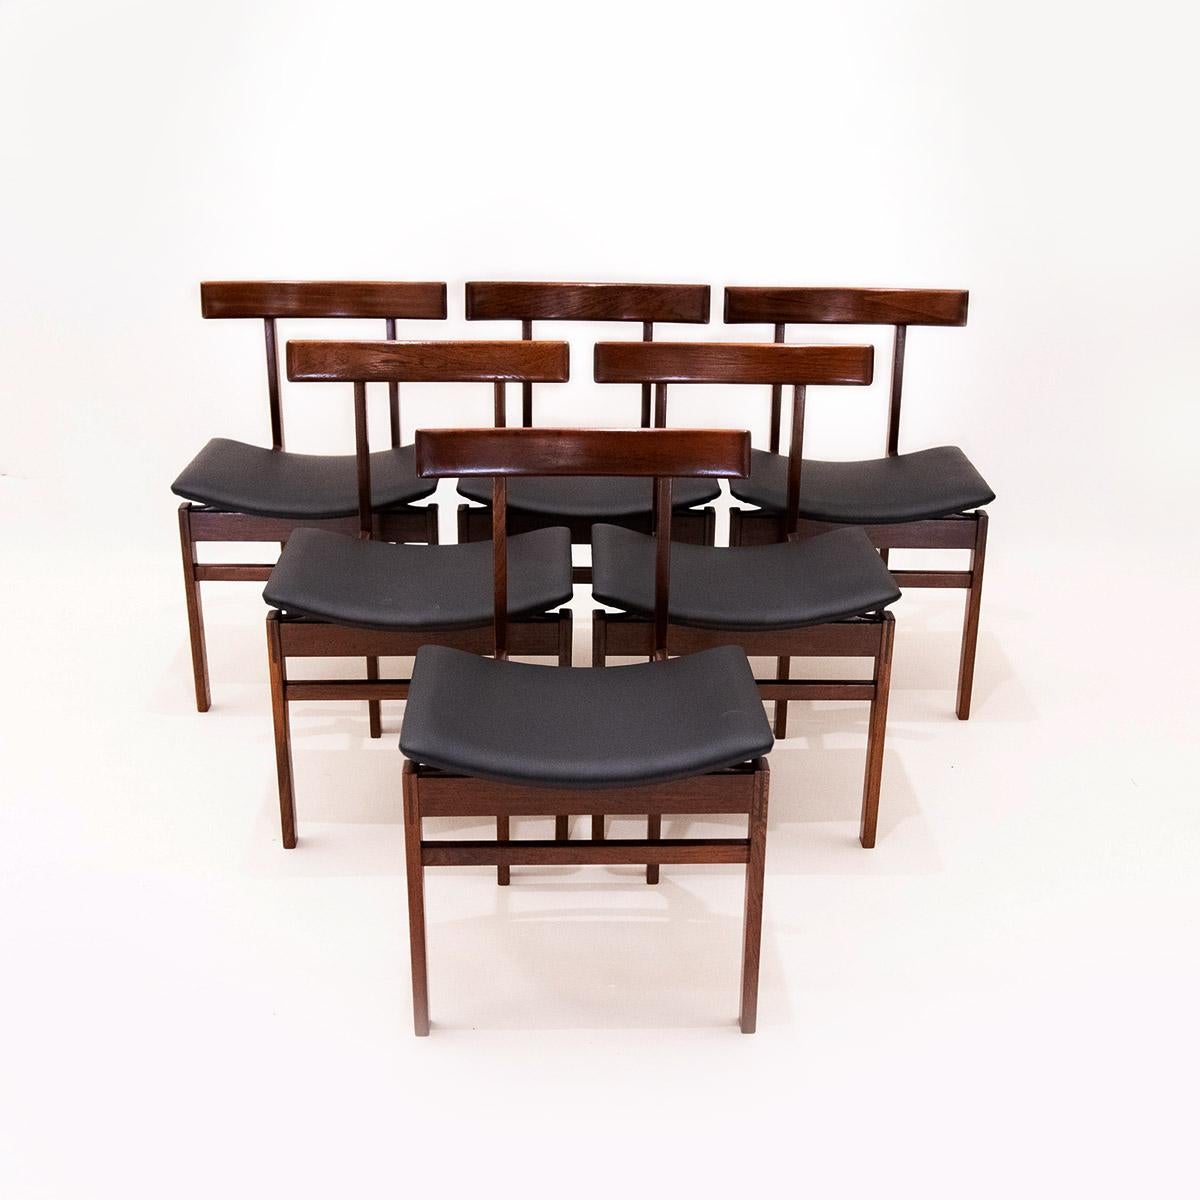 Mid-Century Modern Set of 6 Danish Mid Century Teak and Leather Dining Chairs by Inger Klingenberg 